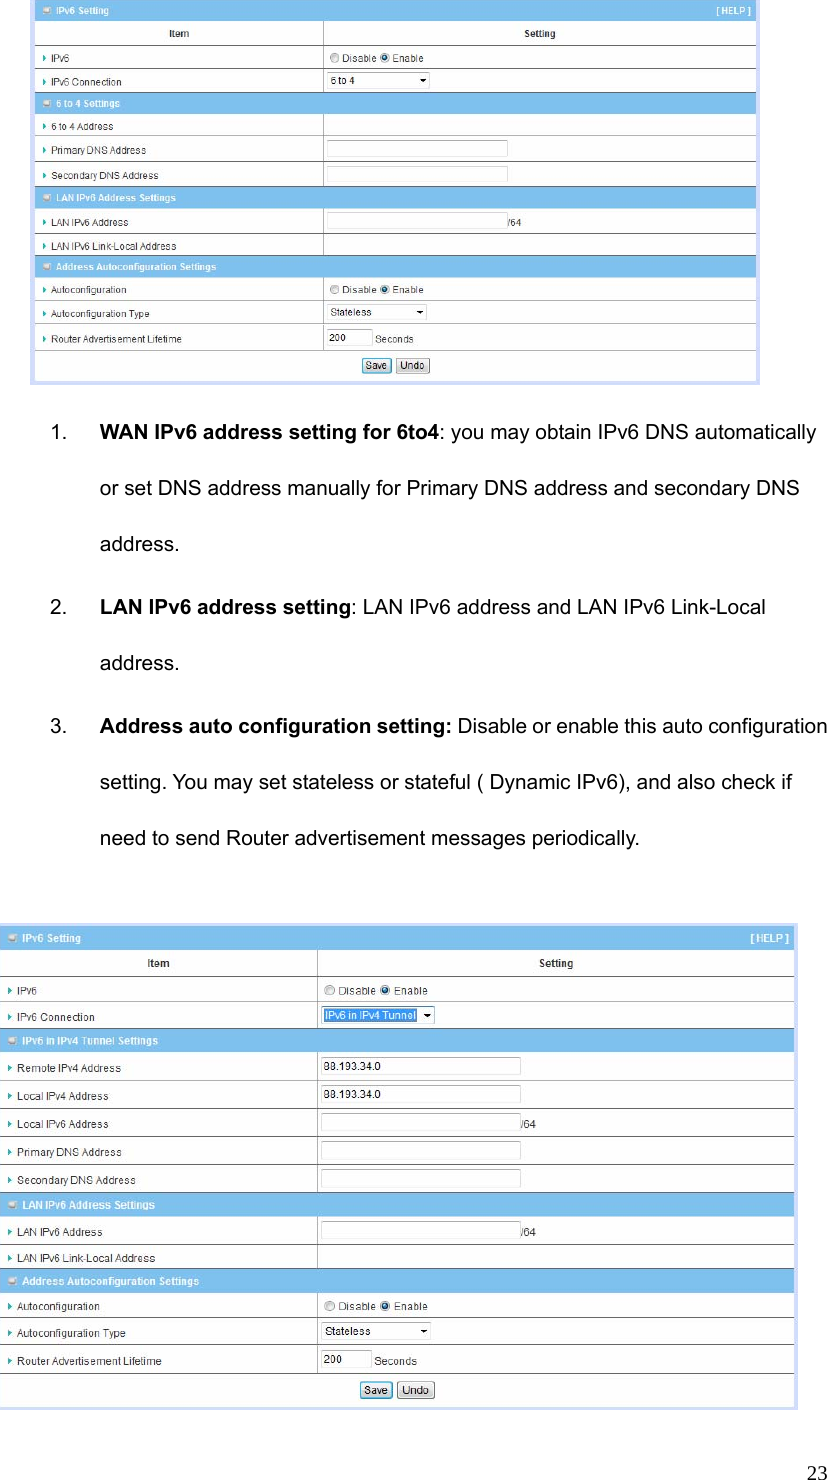  23 1.  WAN IPv6 address setting for 6to4: you may obtain IPv6 DNS automatically or set DNS address manually for Primary DNS address and secondary DNS address. 2.  LAN IPv6 address setting: LAN IPv6 address and LAN IPv6 Link-Local address. 3.  Address auto configuration setting: Disable or enable this auto configuration setting. You may set stateless or stateful ( Dynamic IPv6), and also check if need to send Router advertisement messages periodically.   